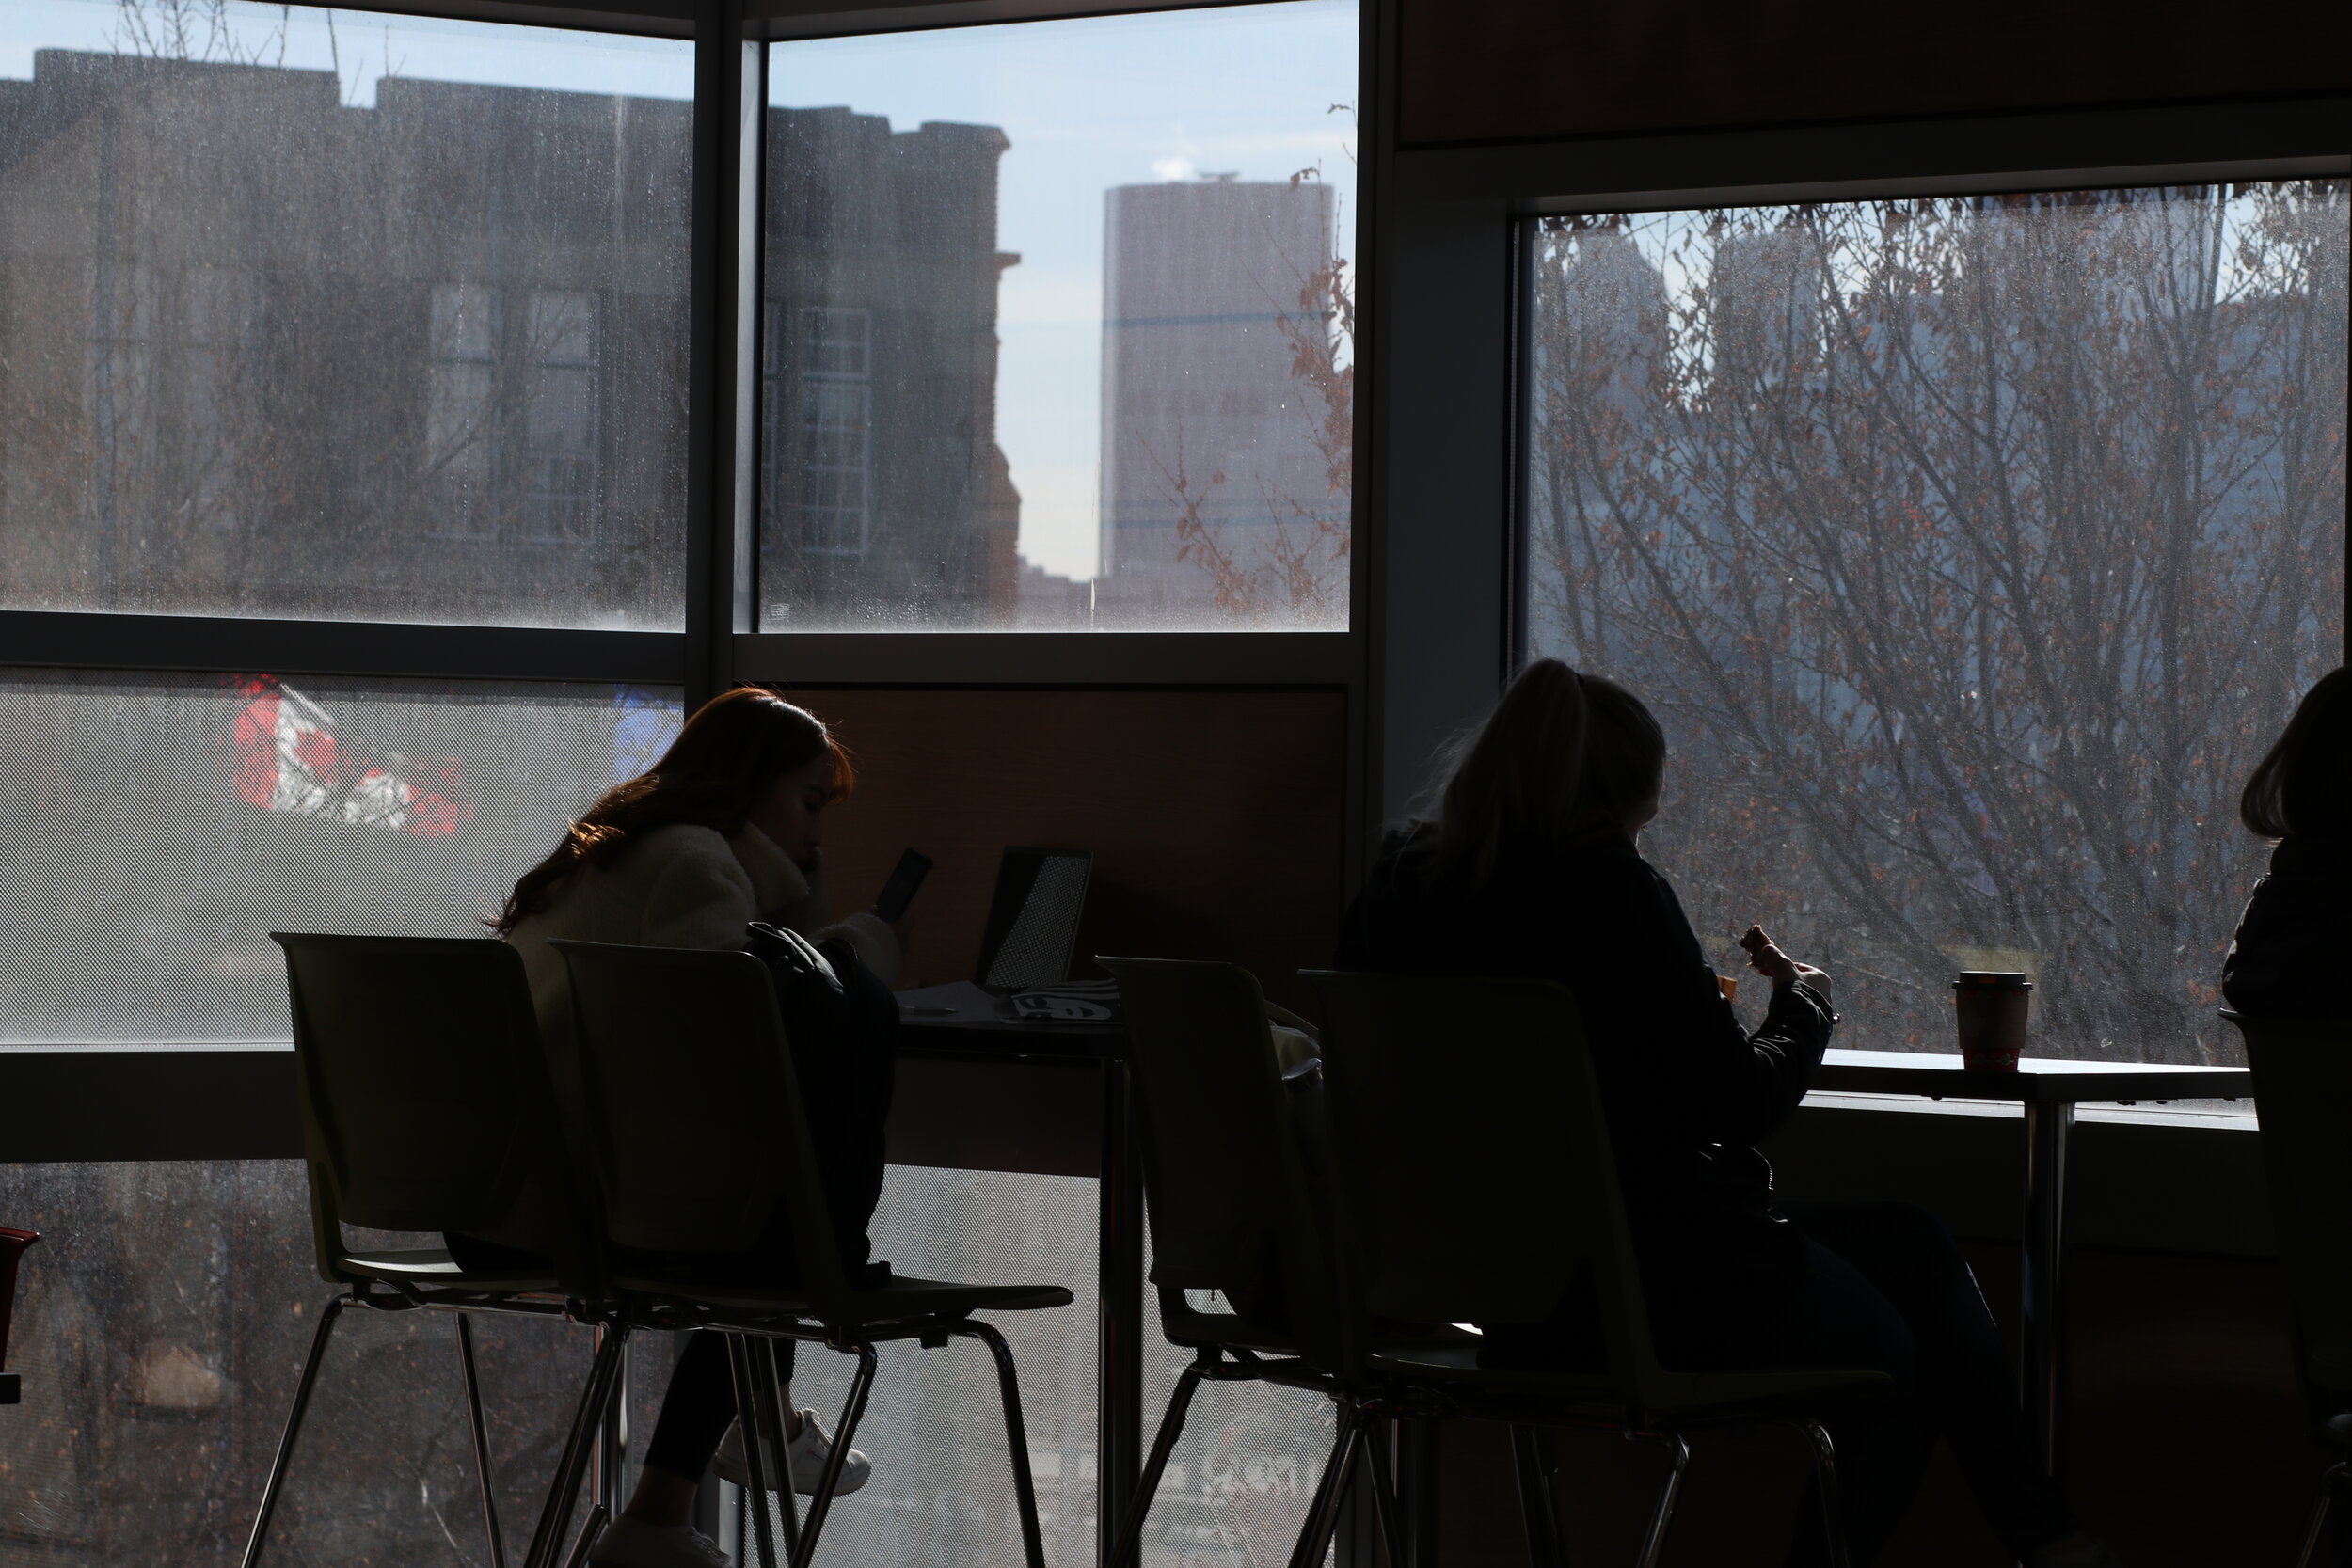  Students at SAIT, study during midterms amid uncertainty in funding and the future of the institution. 